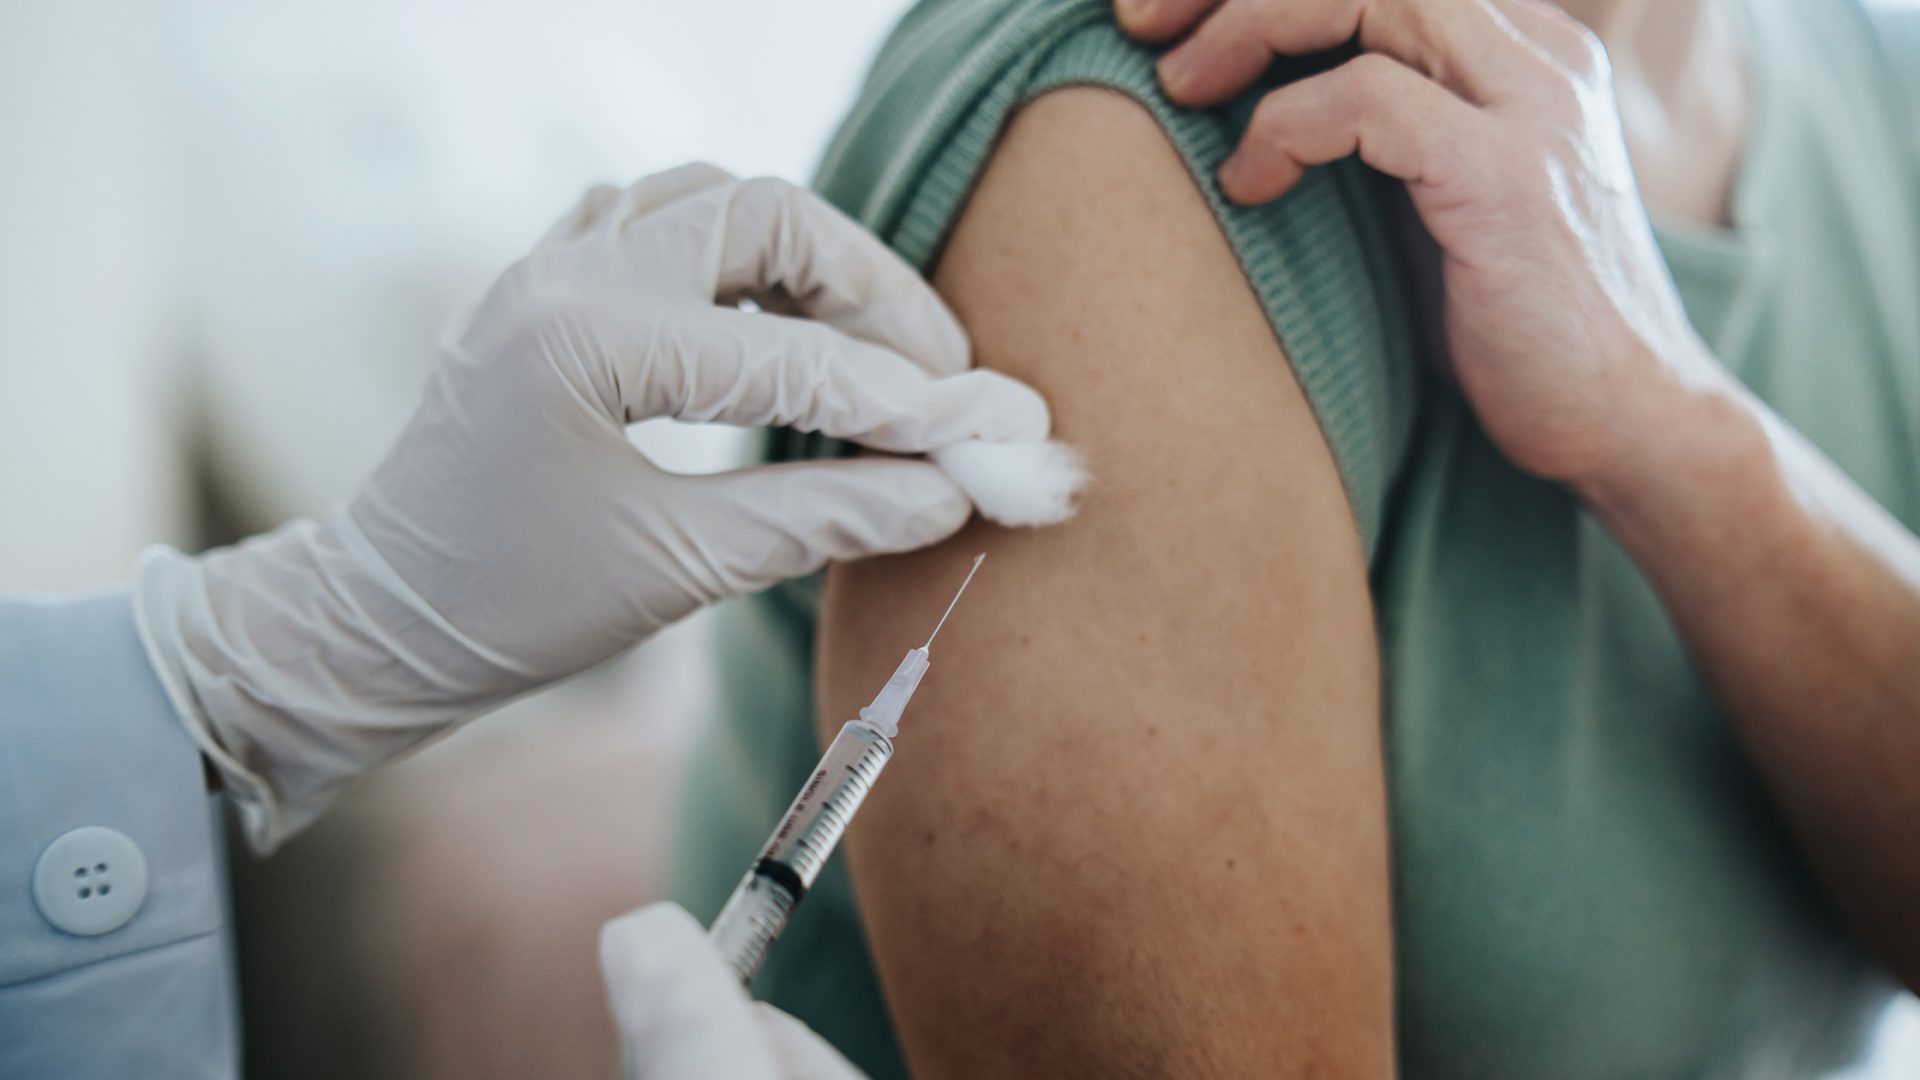 Receiving a Vaccine via Injection in Their Arm